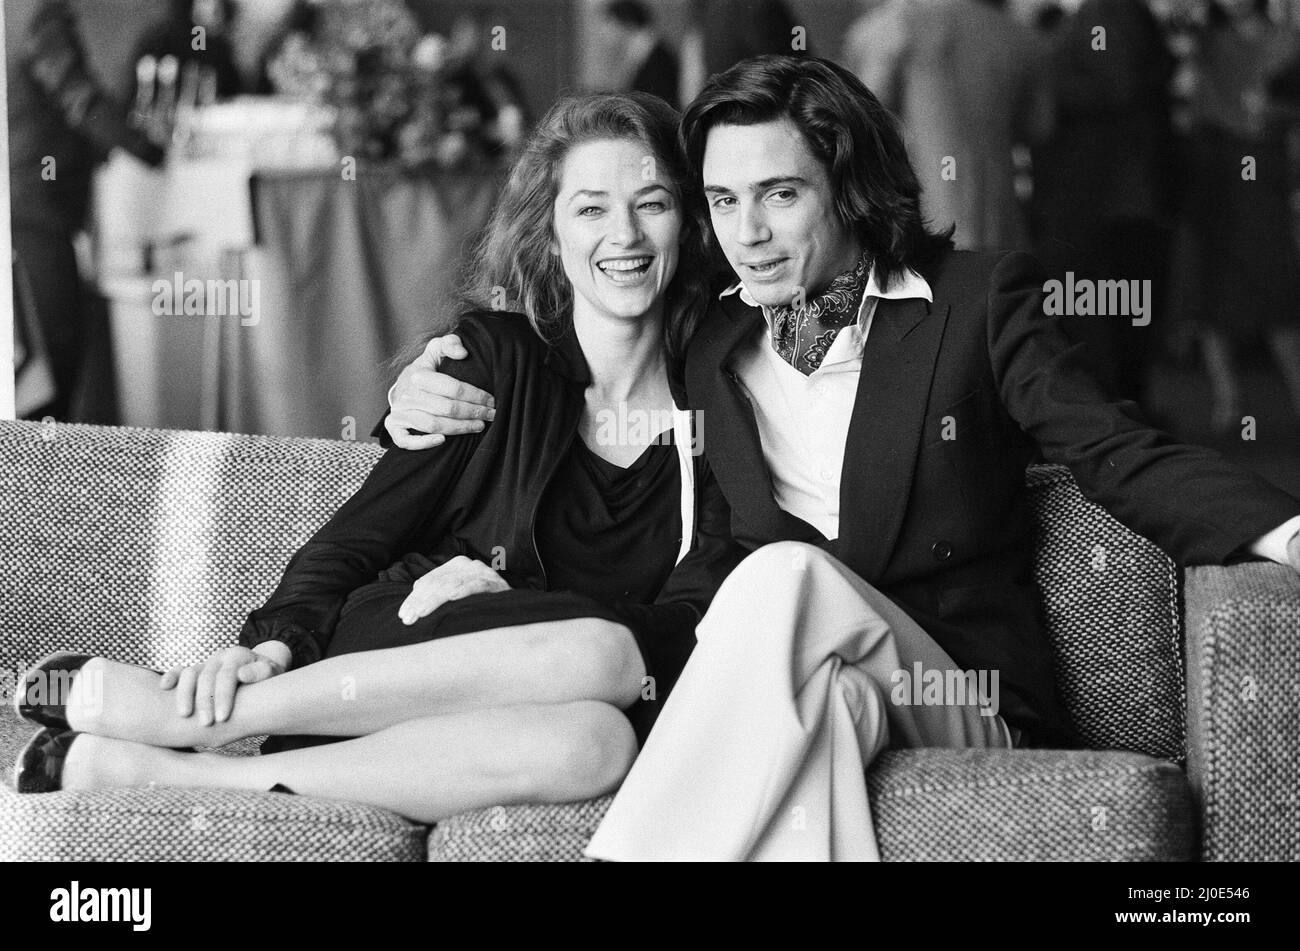 Jean-Michel Jarre with his wife Charlotte Rampling at a photocall and reception at the Intercontinental Hotel, Hyde Park. 30th November 1978. Stock Photo